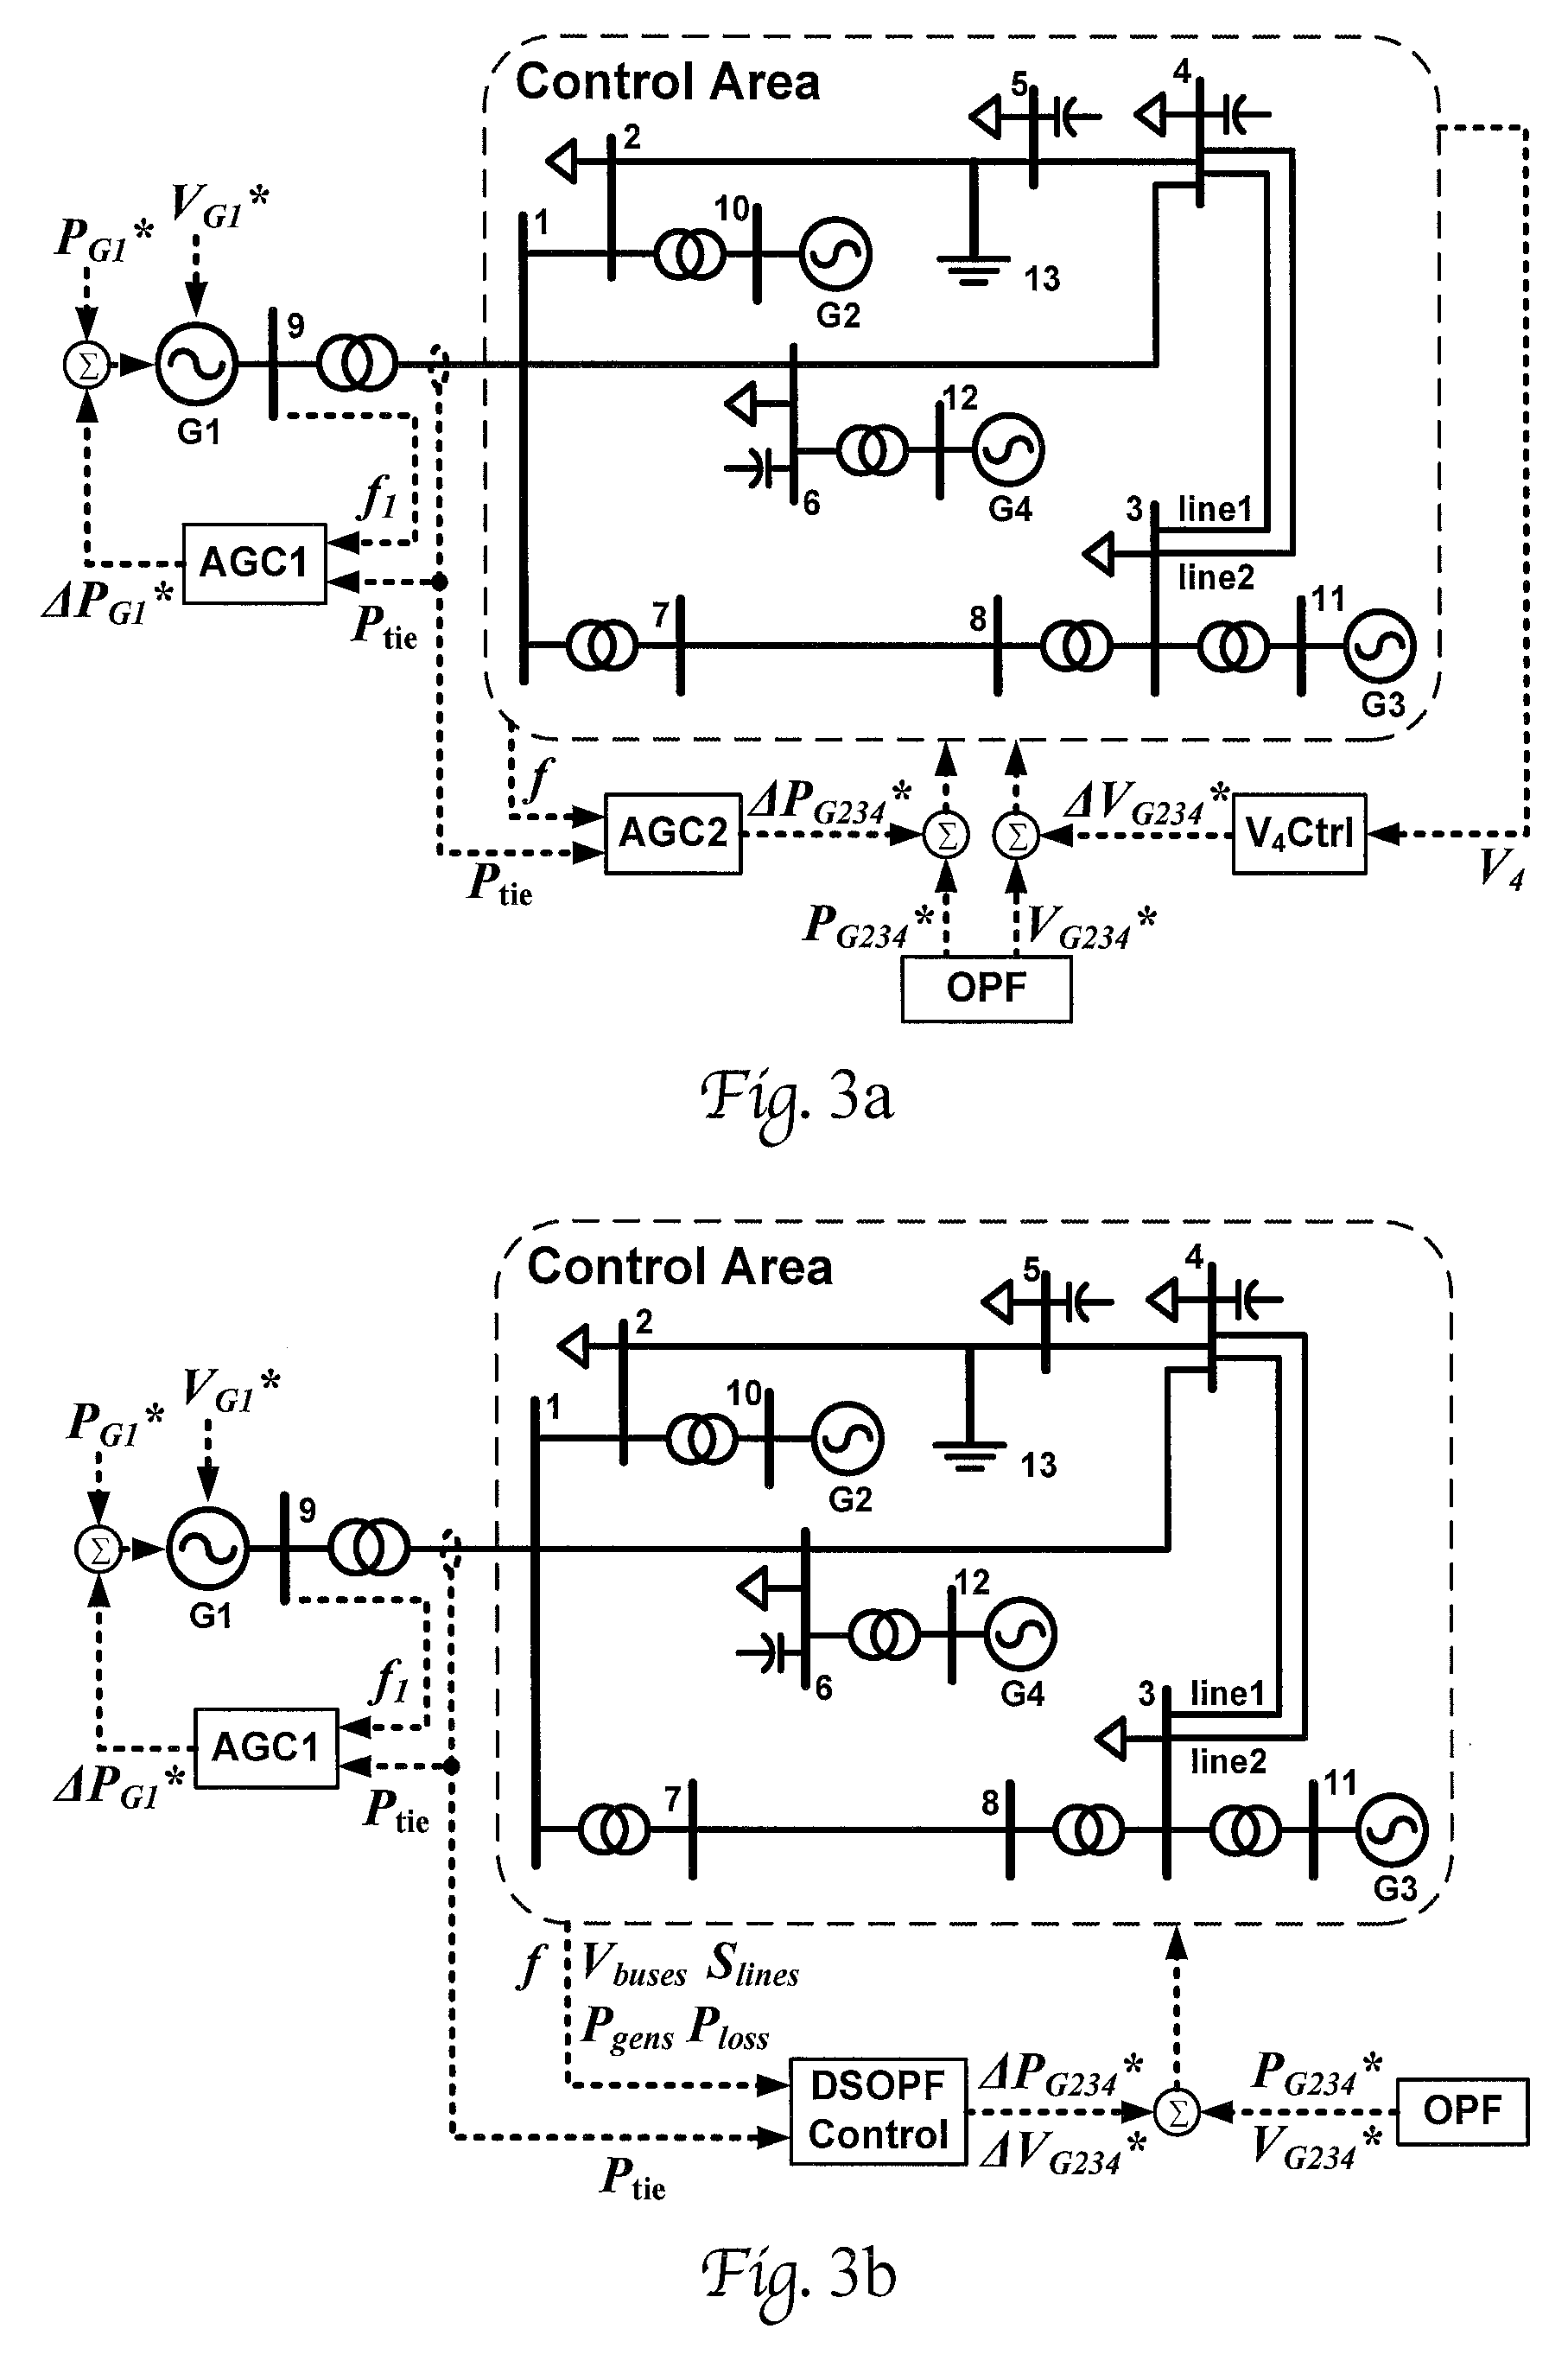 Method and System for Dynamic Stochastic Optimal Electric Power Flow Control